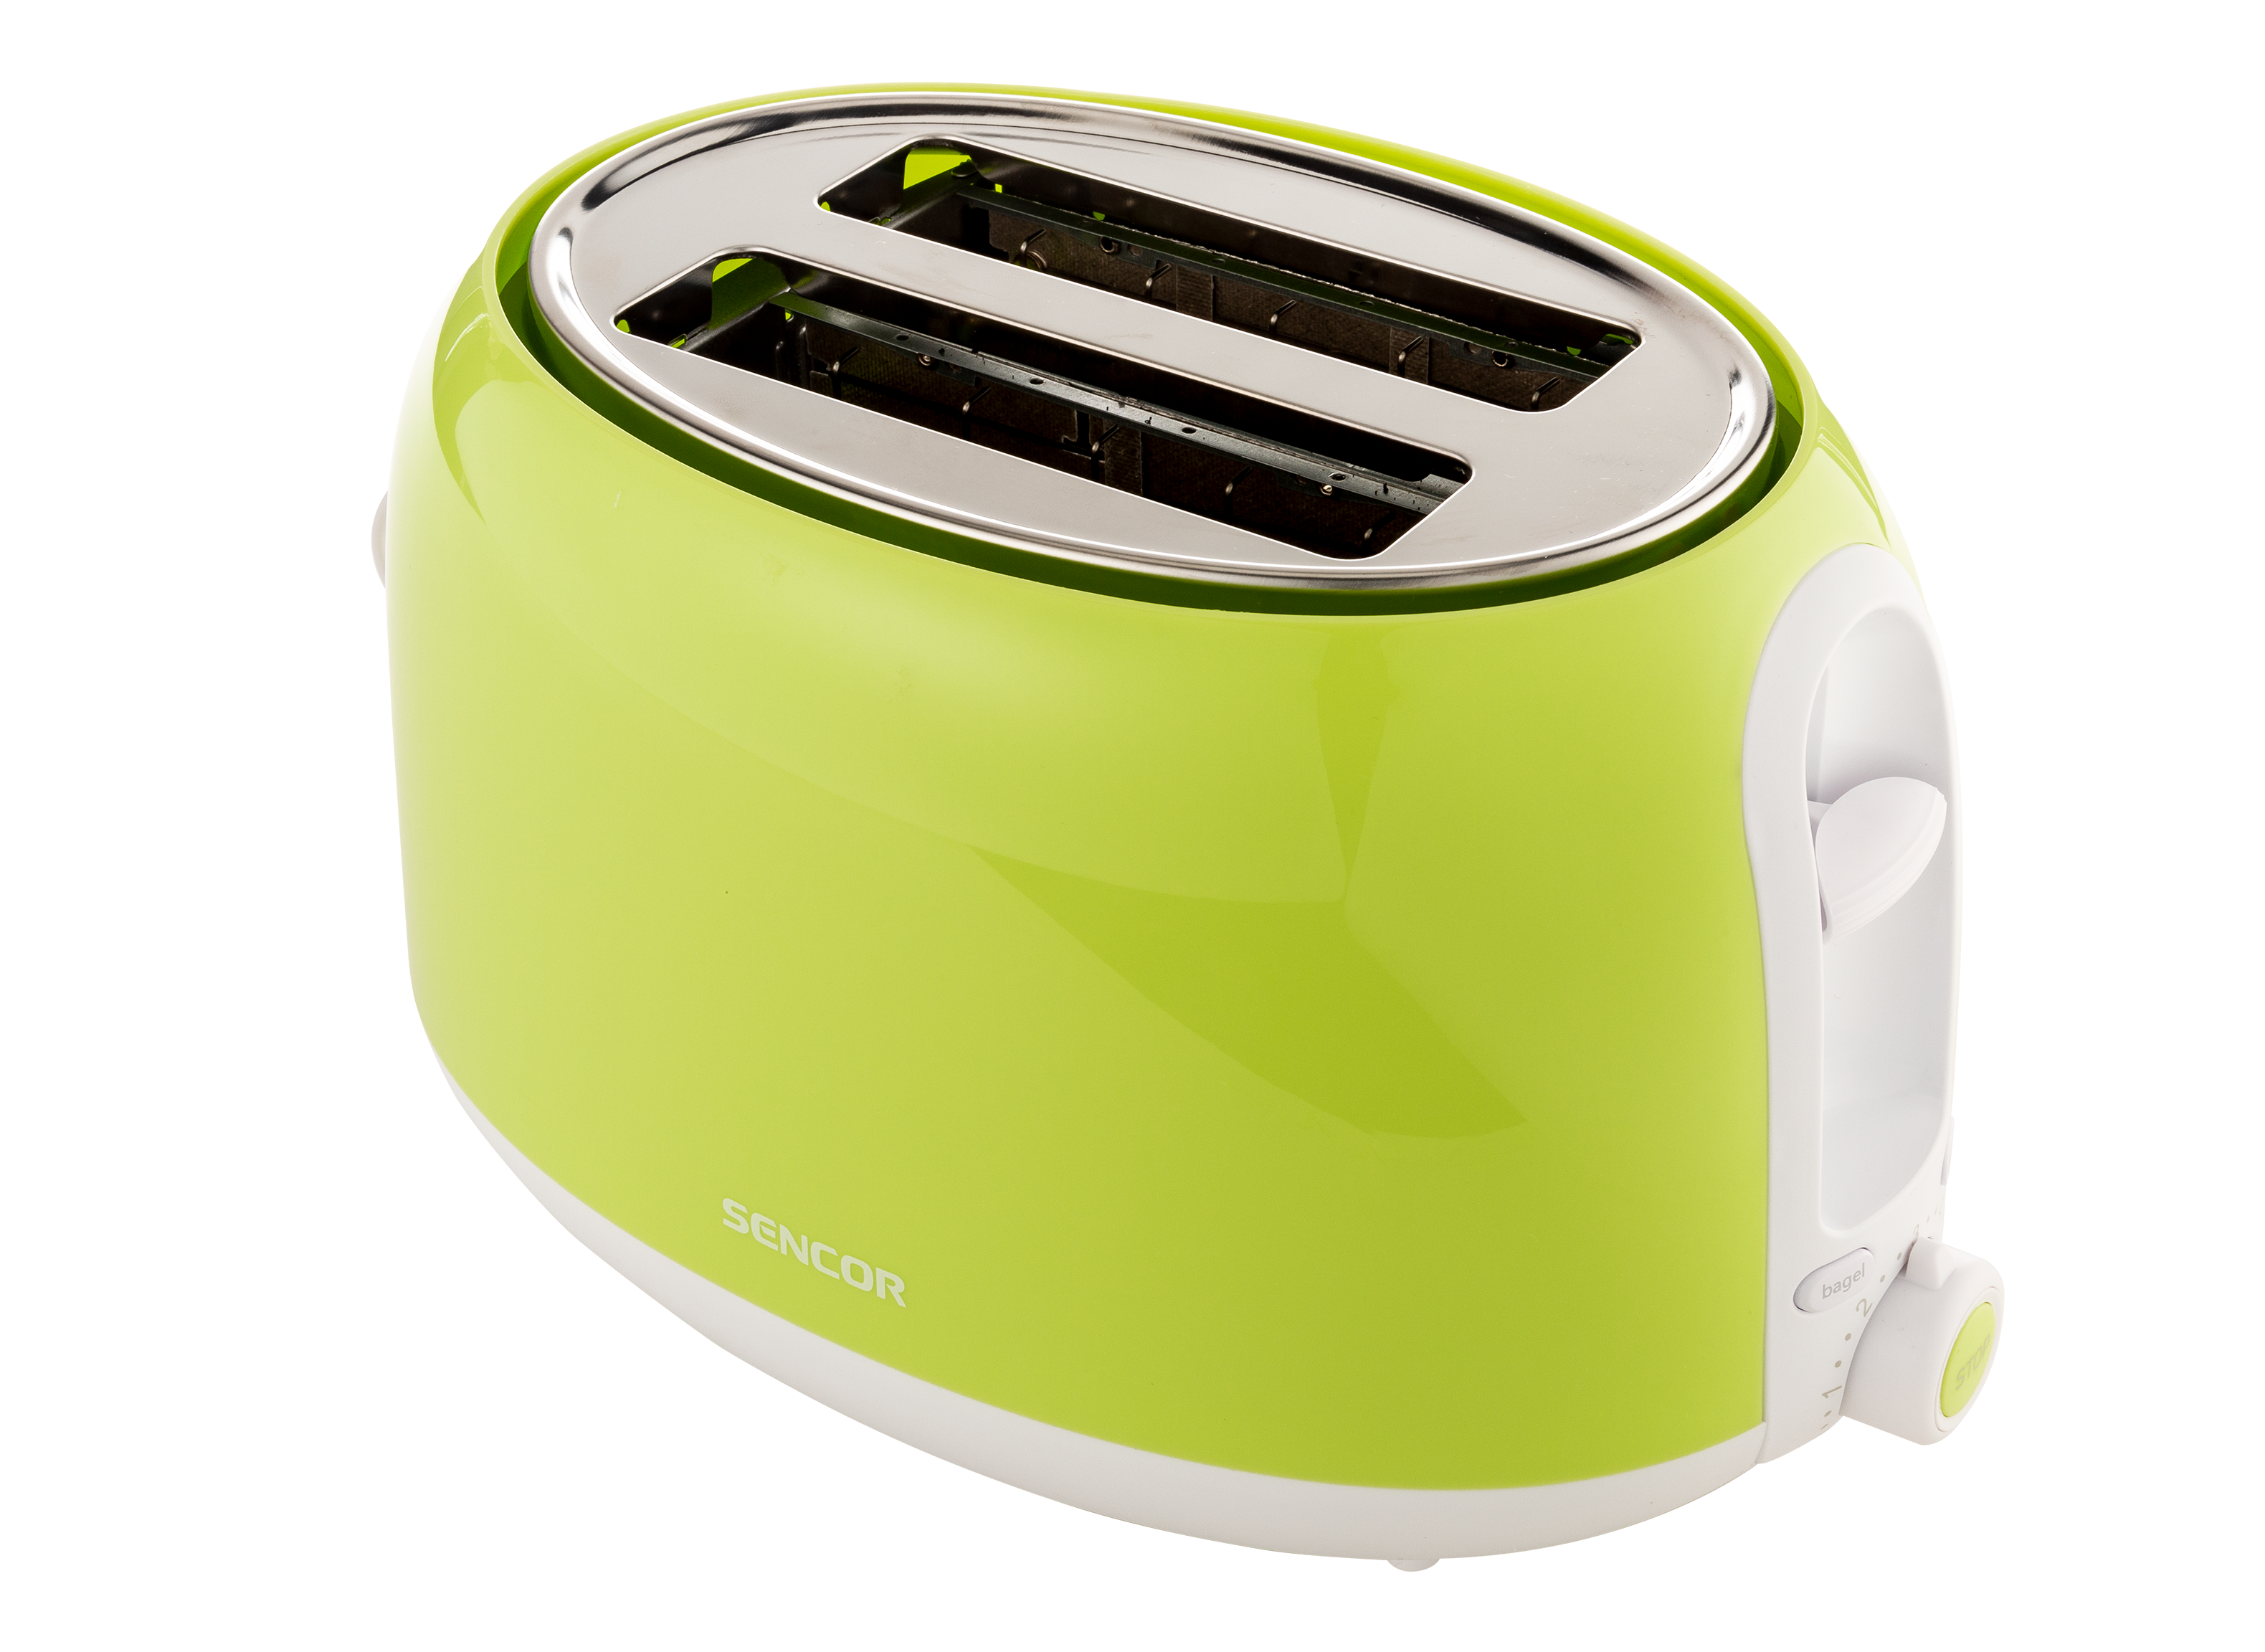 https://crdms.images.consumerreports.org/prod/products/cr/models/404772-2-slice-toasters-sencor-2-slice-toaster-10024439.png